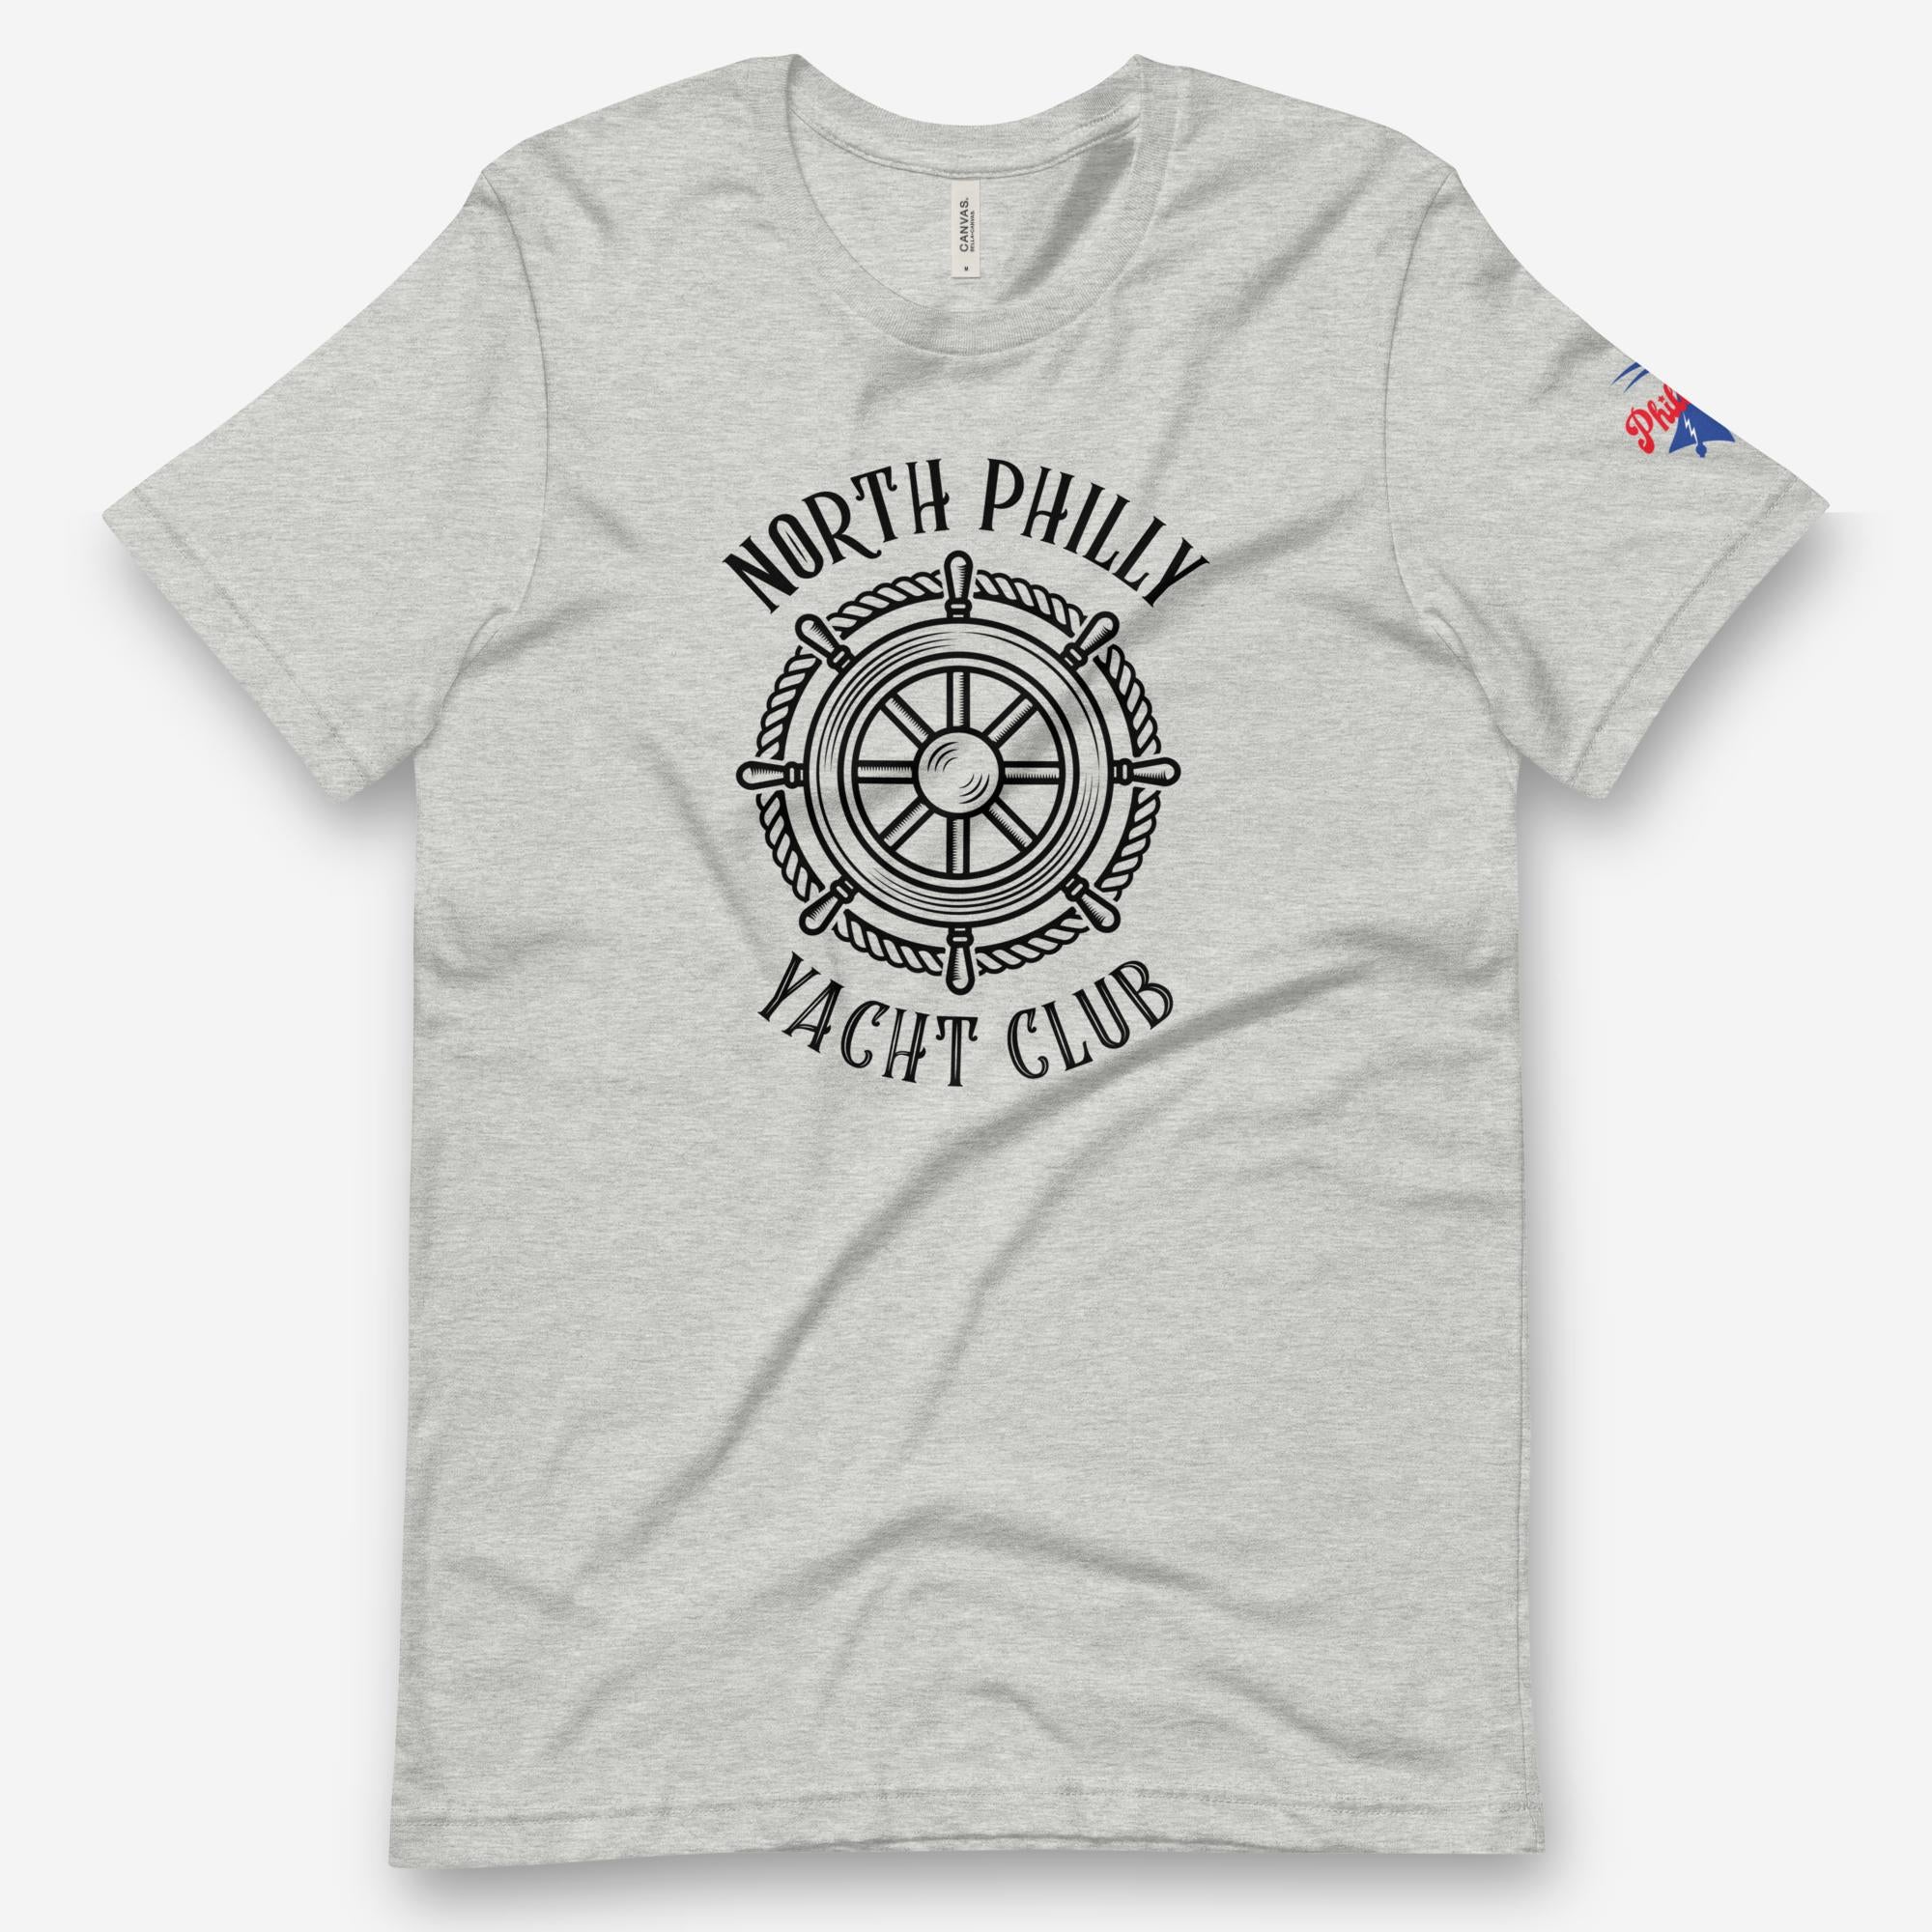 "North Philly Yacht Club" Tee